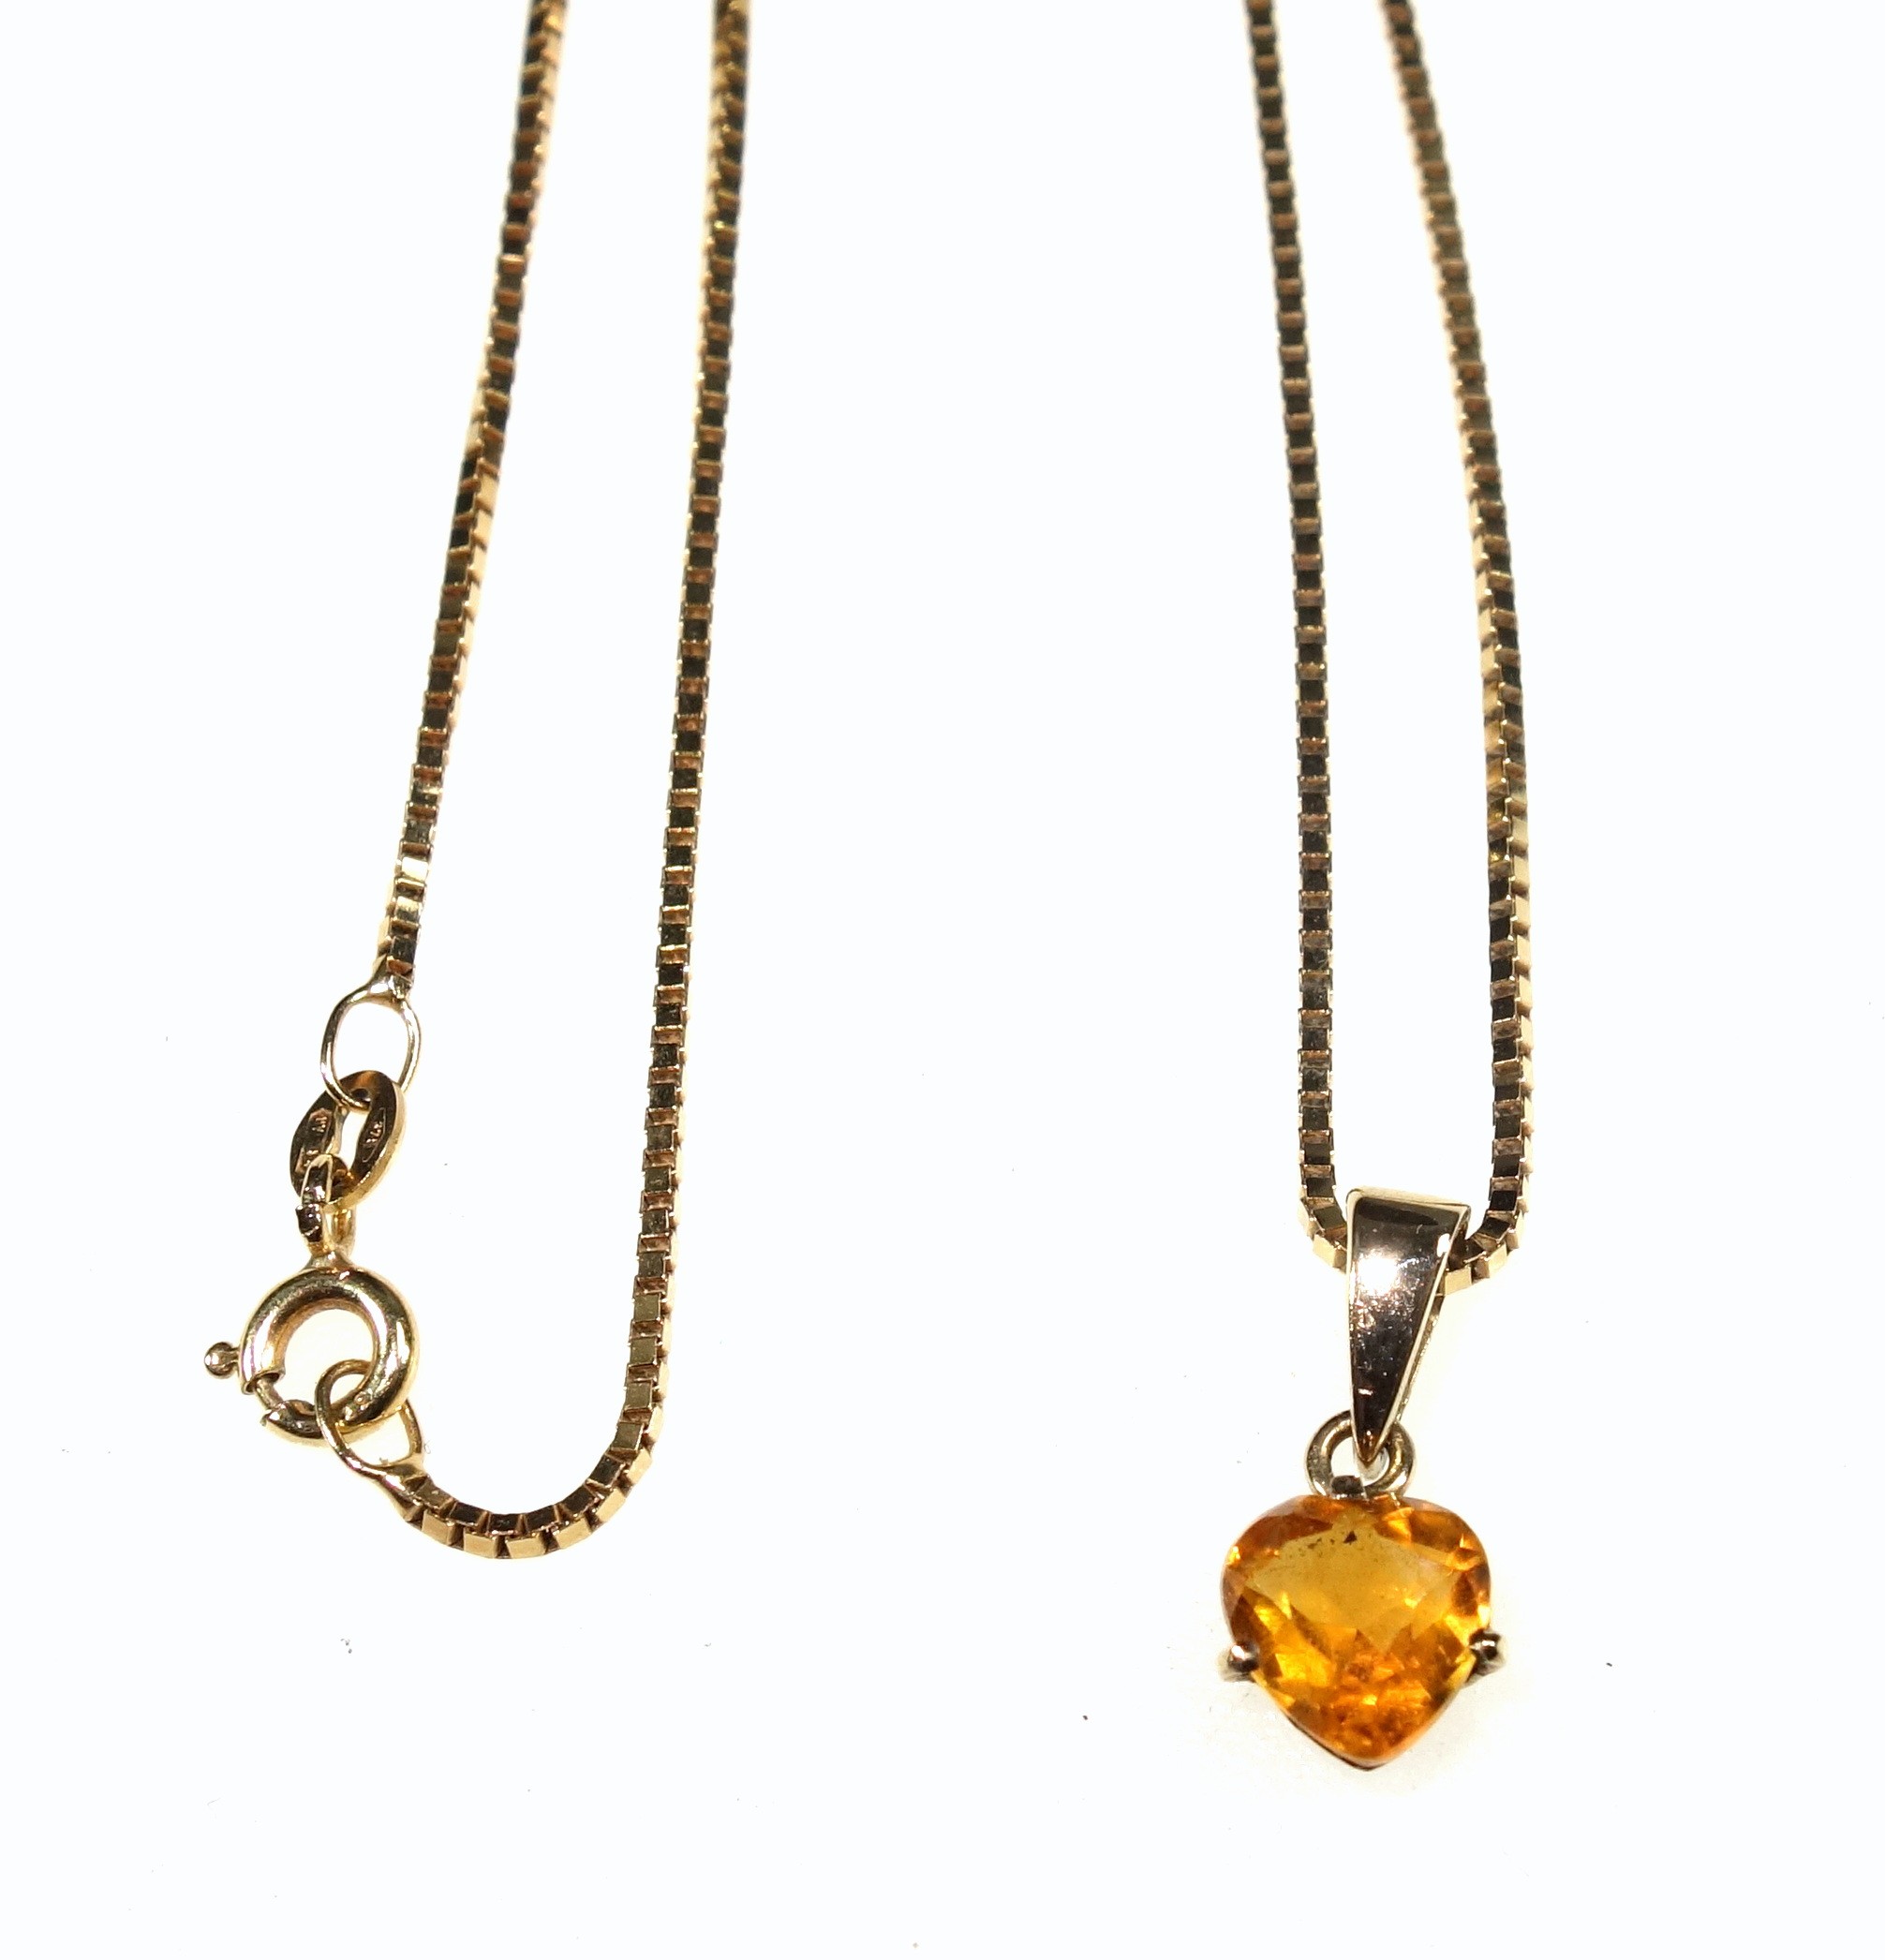 9ct gold Unoaerre box link necklace, length 46.5cm approx., and citrine heart shaped gold pendant, - Image 3 of 3